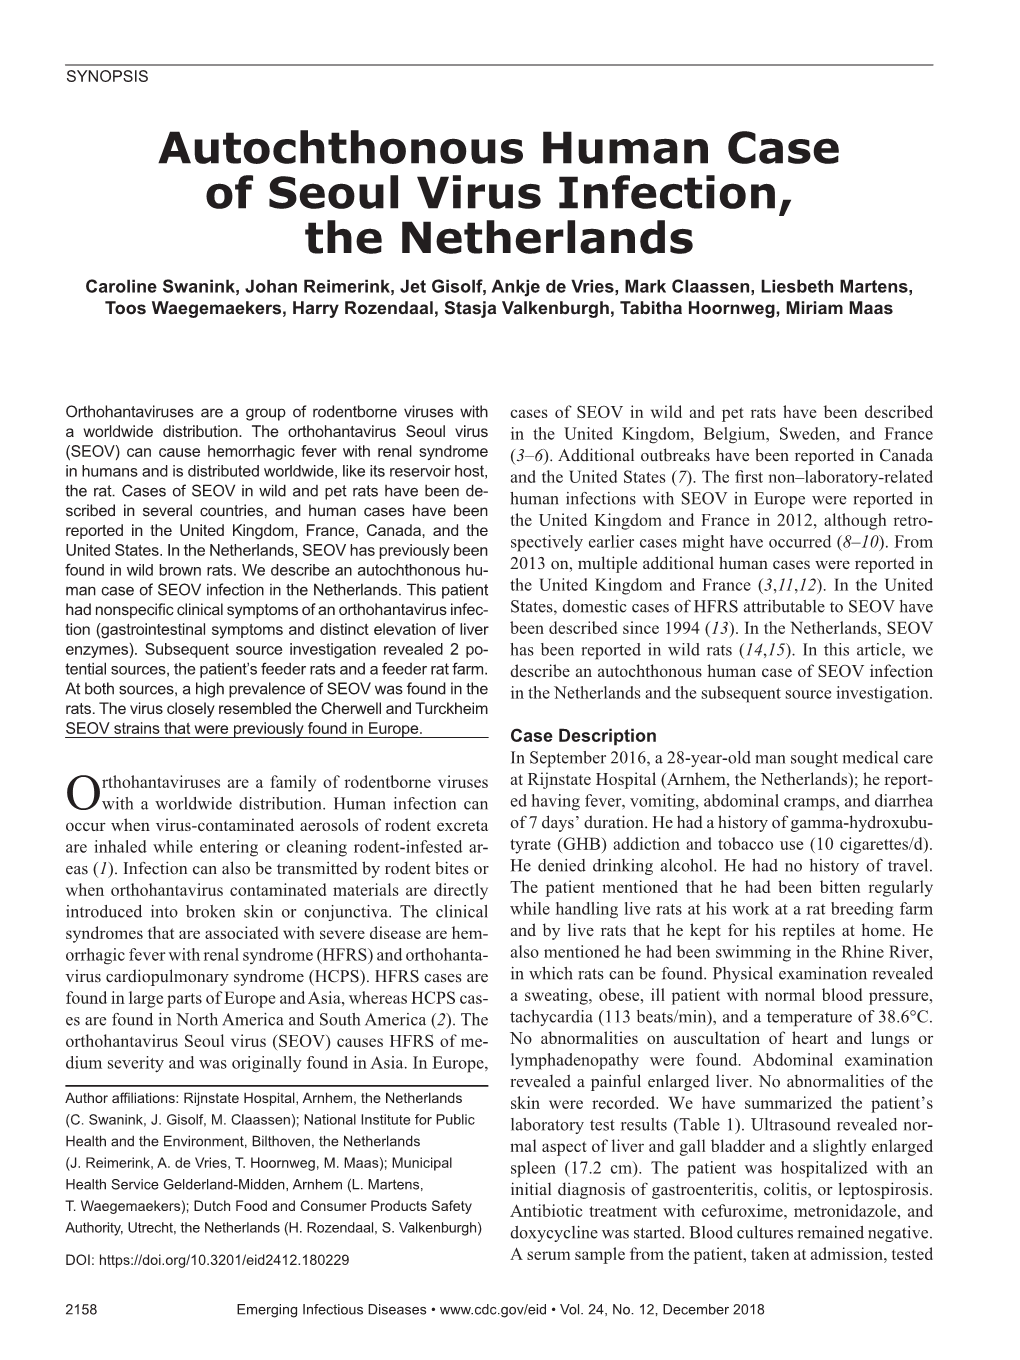 Autochthonous Human Case of Seoul Virus Infection, the Netherlands